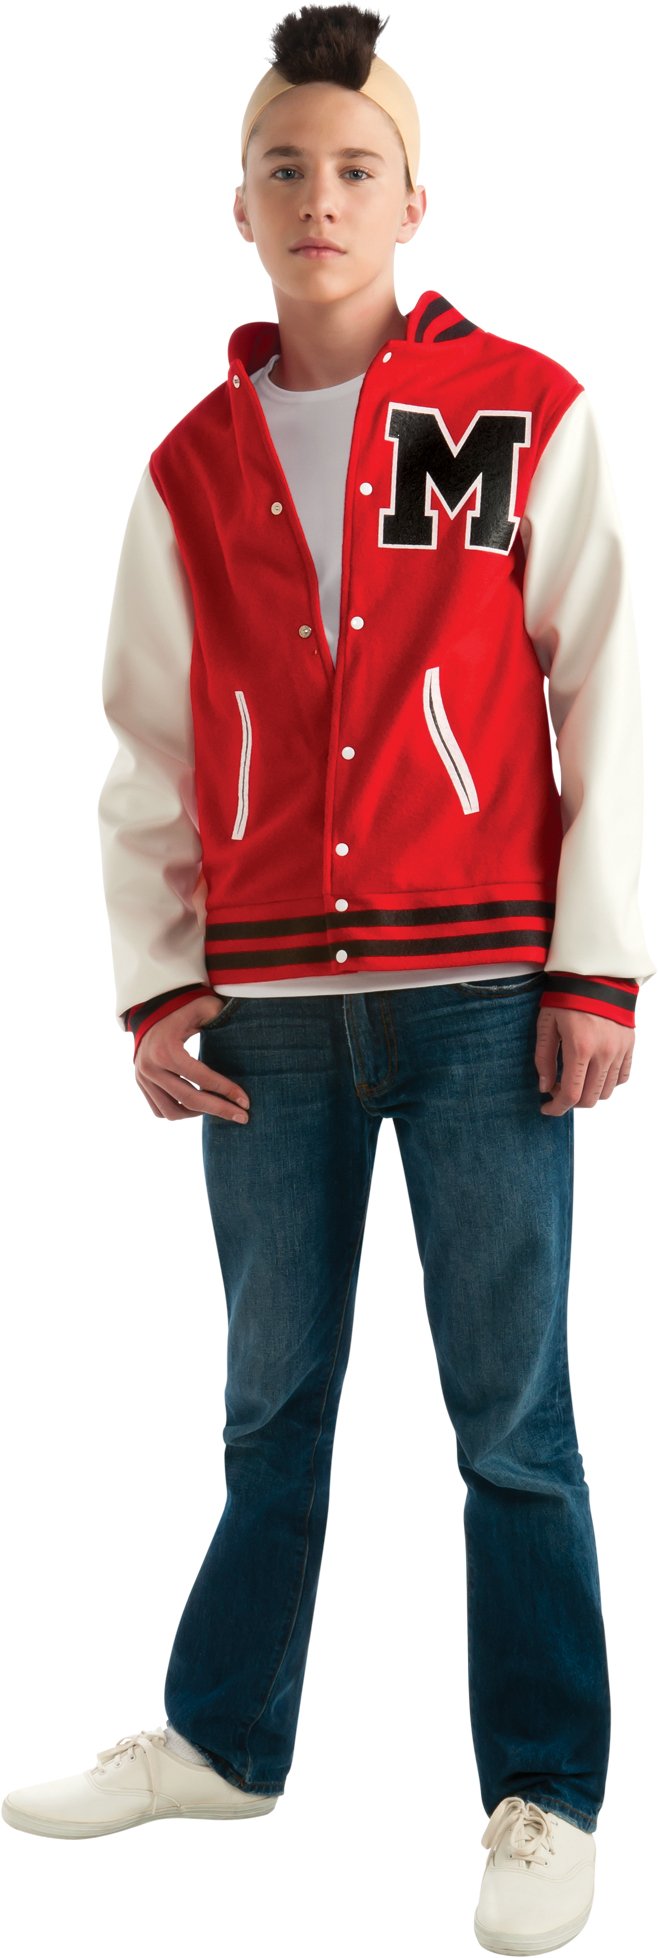 Glee - Puck Teen Costume - Click Image to Close